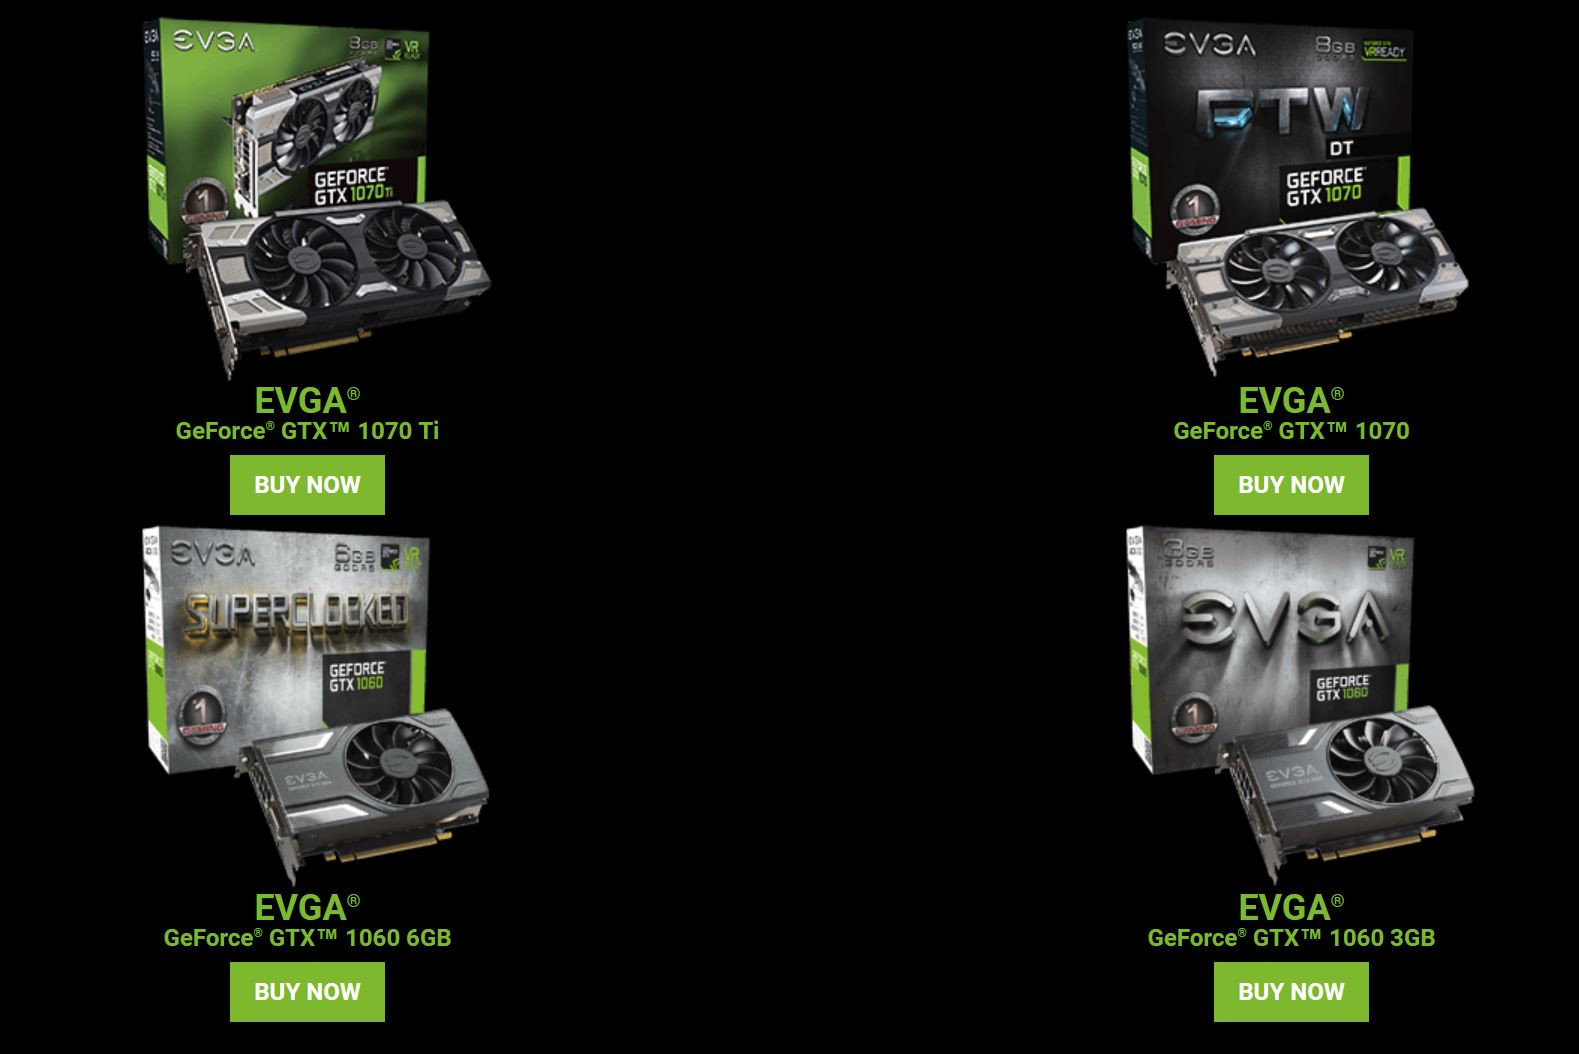 Evga Bundles Fortnite With Select Geforce Gtx Graphics Cards - see more details and see qualifying evga geforce gtx graphics cards here fortnite counterattack set